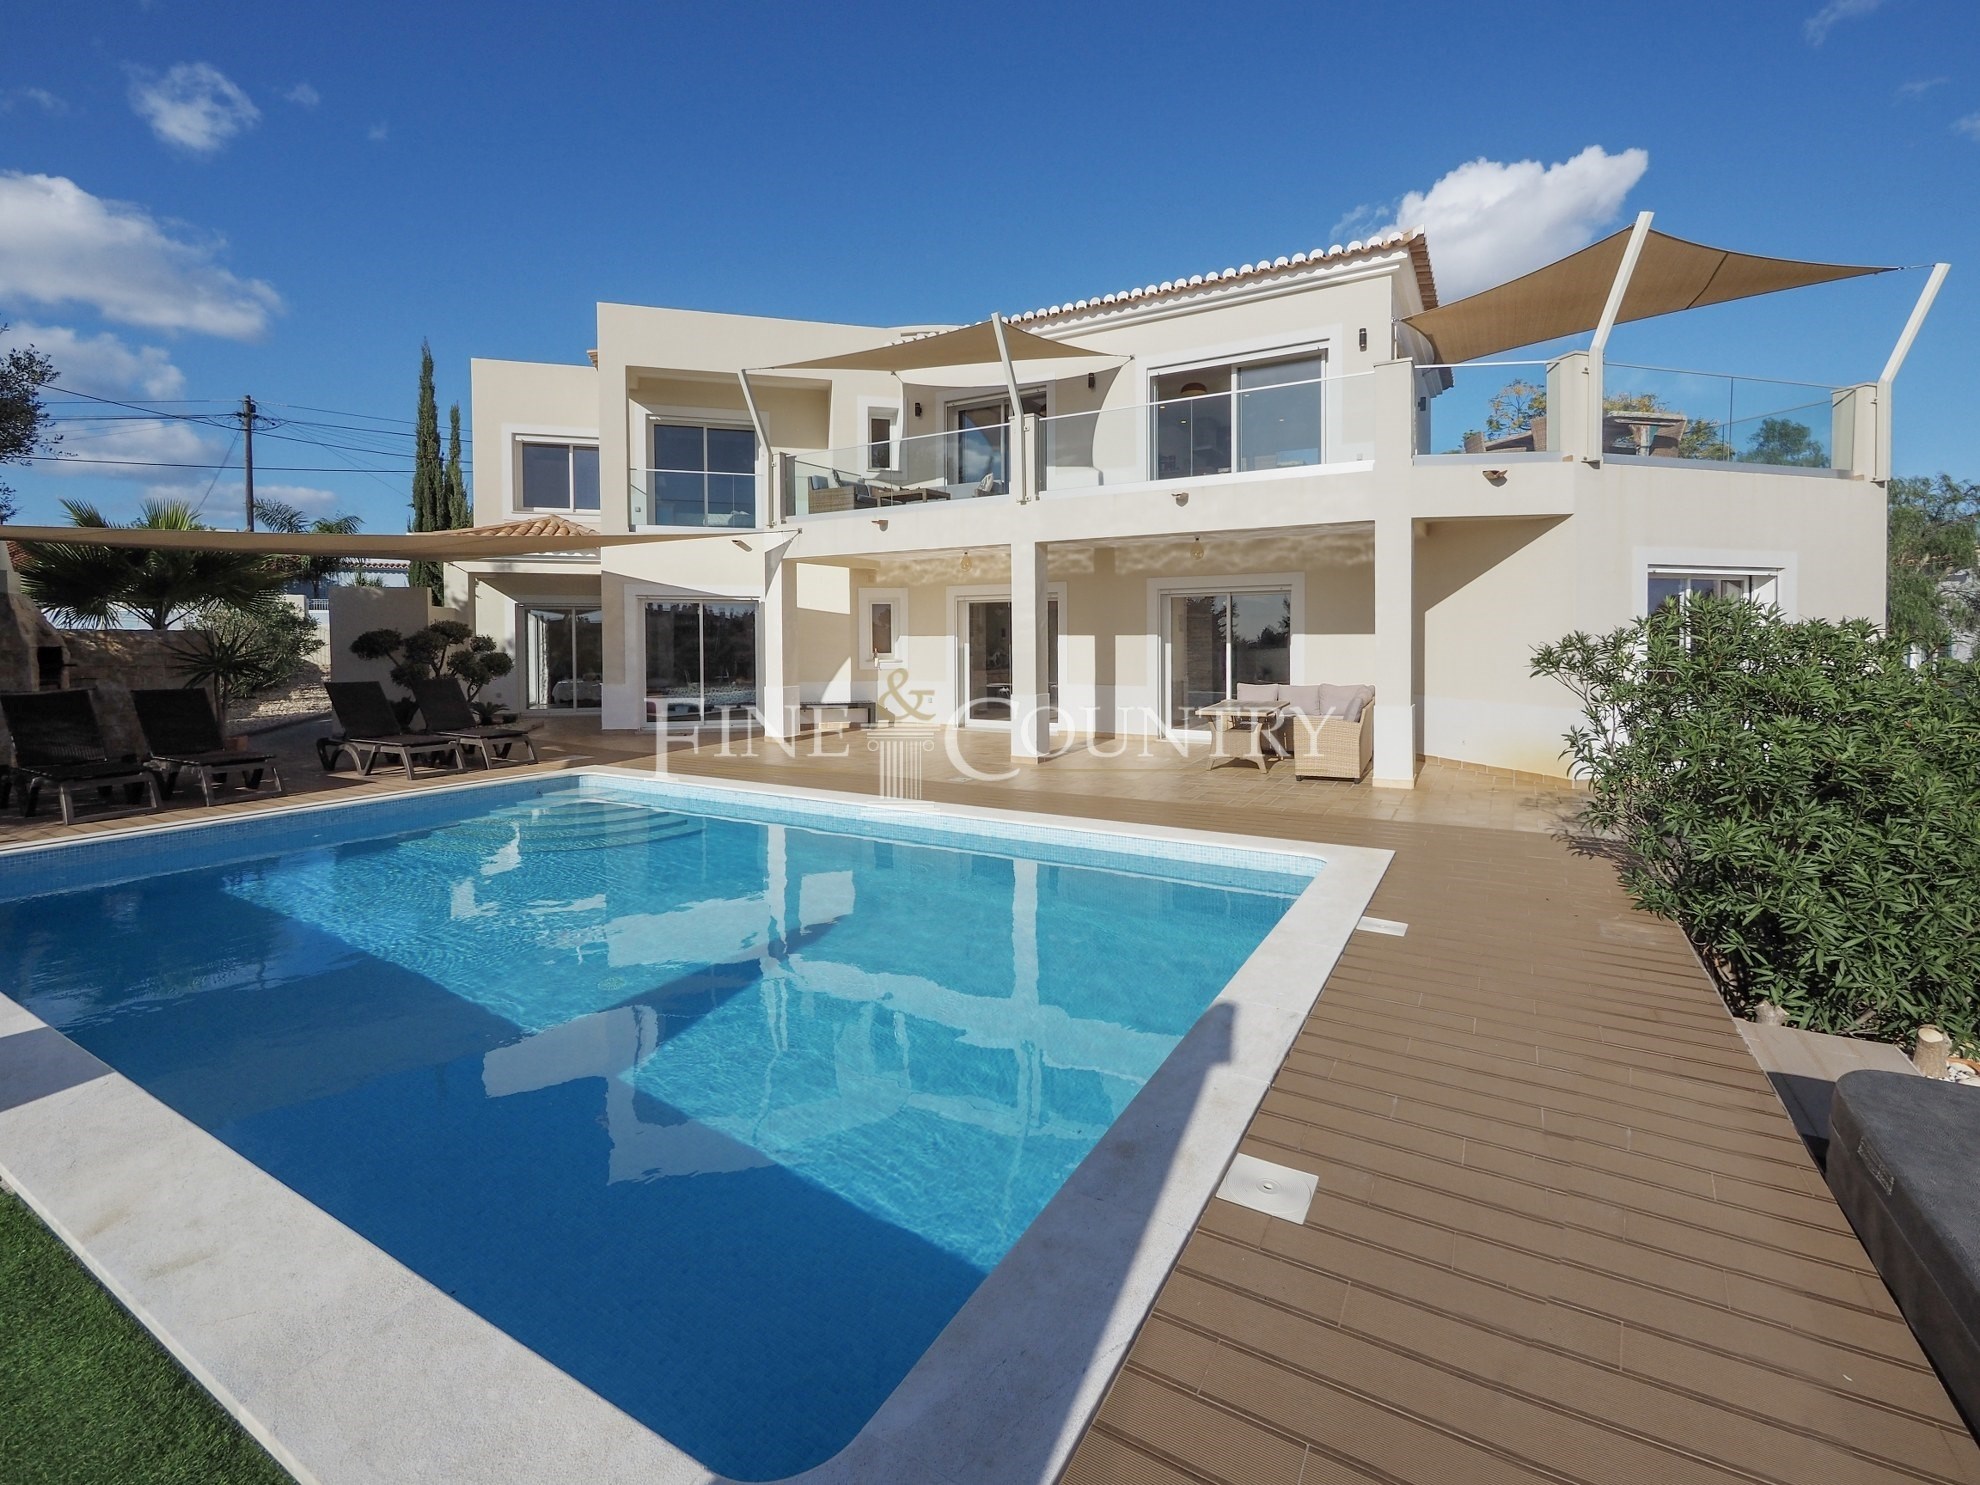 Carvoeiro – 4-bedroom villa with heated pool, large garage and sea views Accommodation in Lagoa